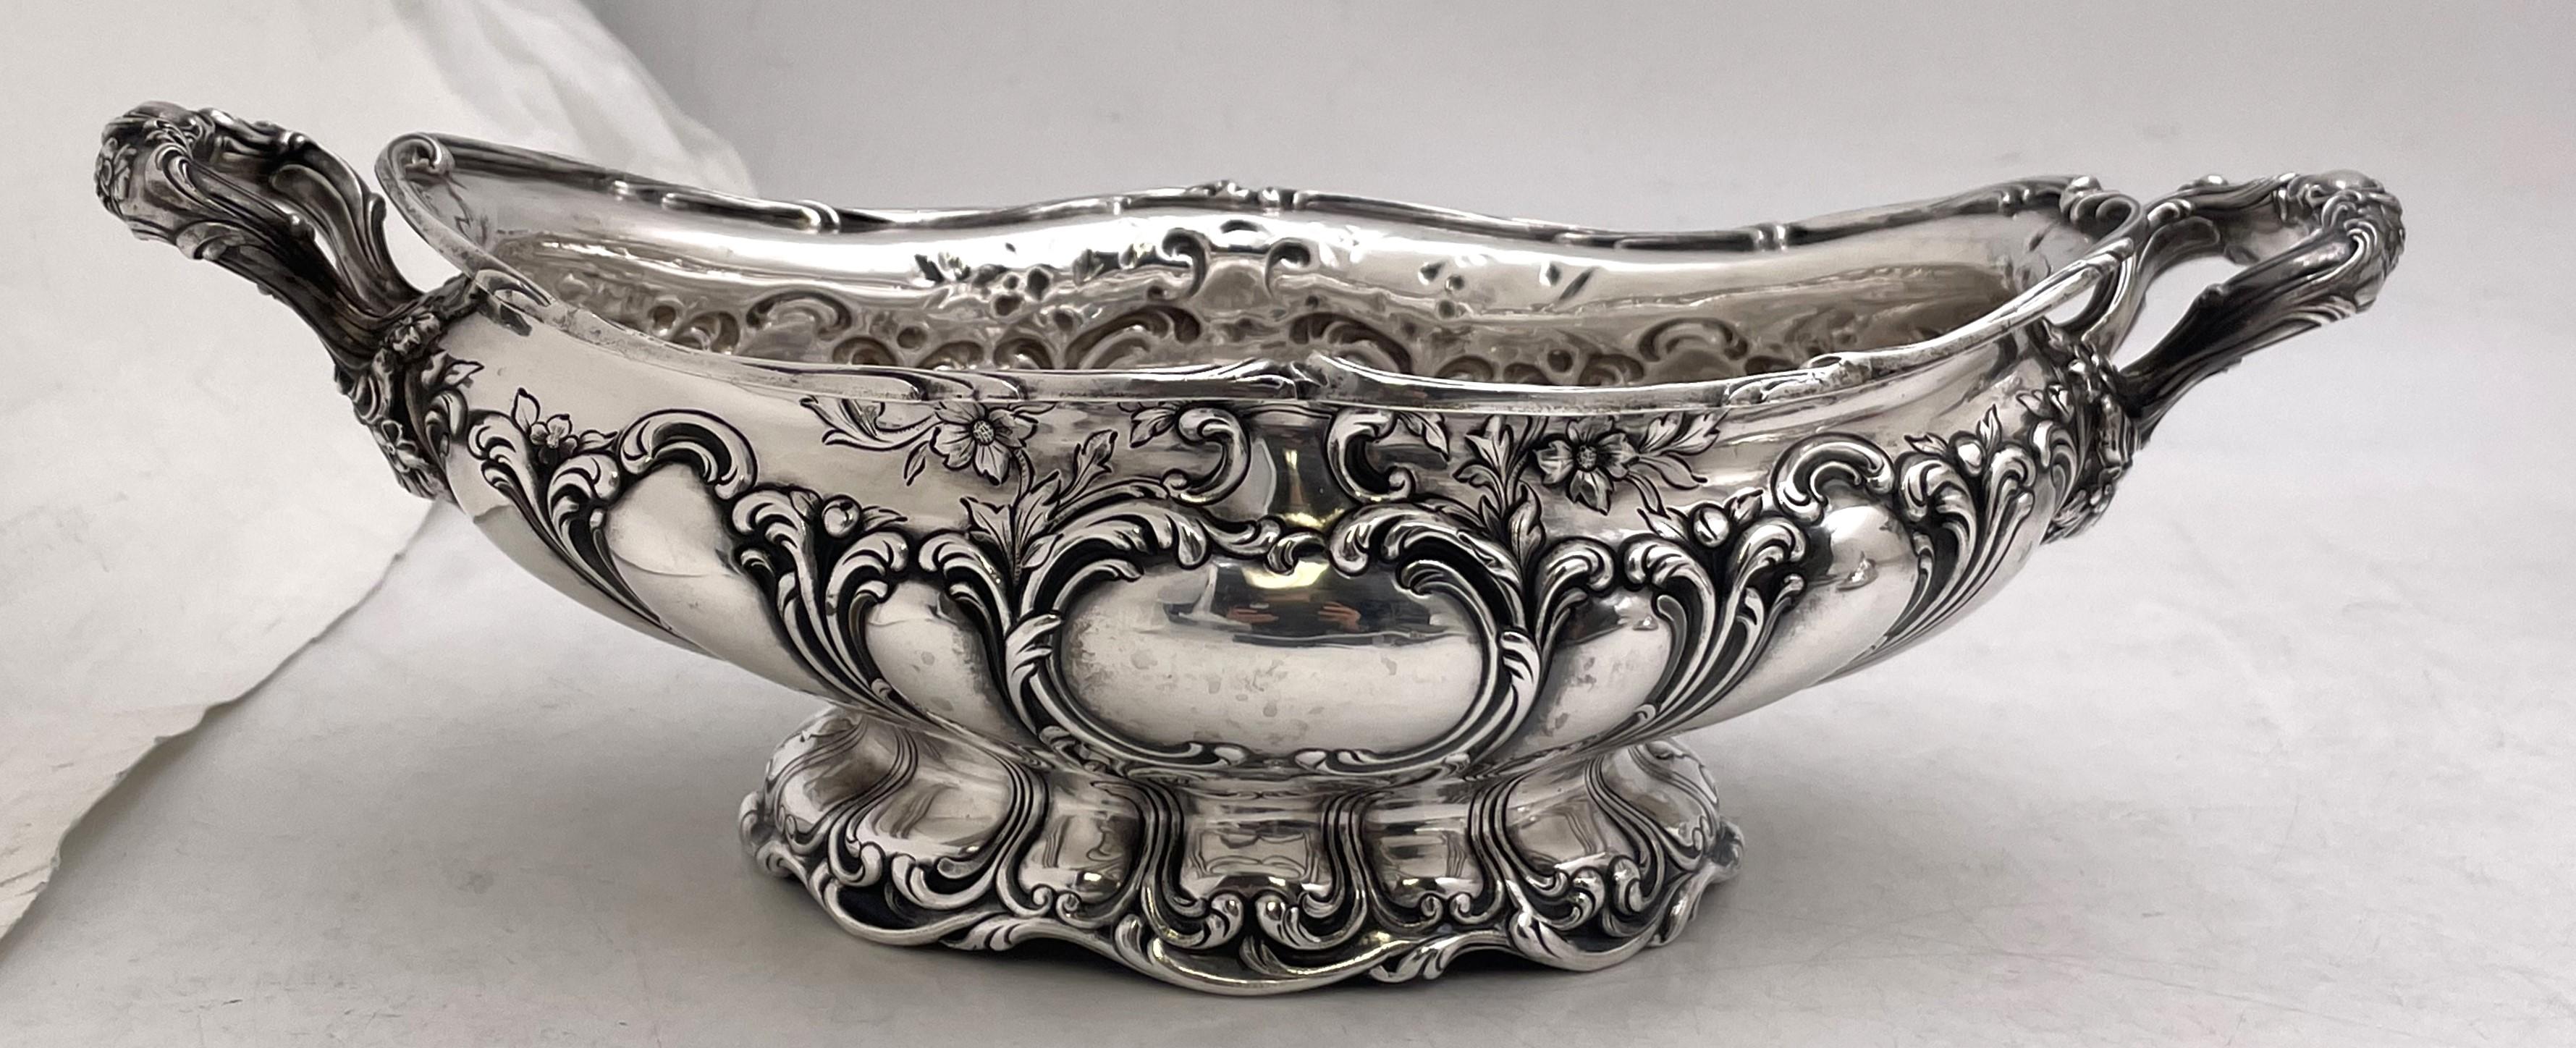 Early 20th Century Gorham Chantilly Grande Pair of Sterling Silver 1900 Tureens Art Nouveau Style For Sale